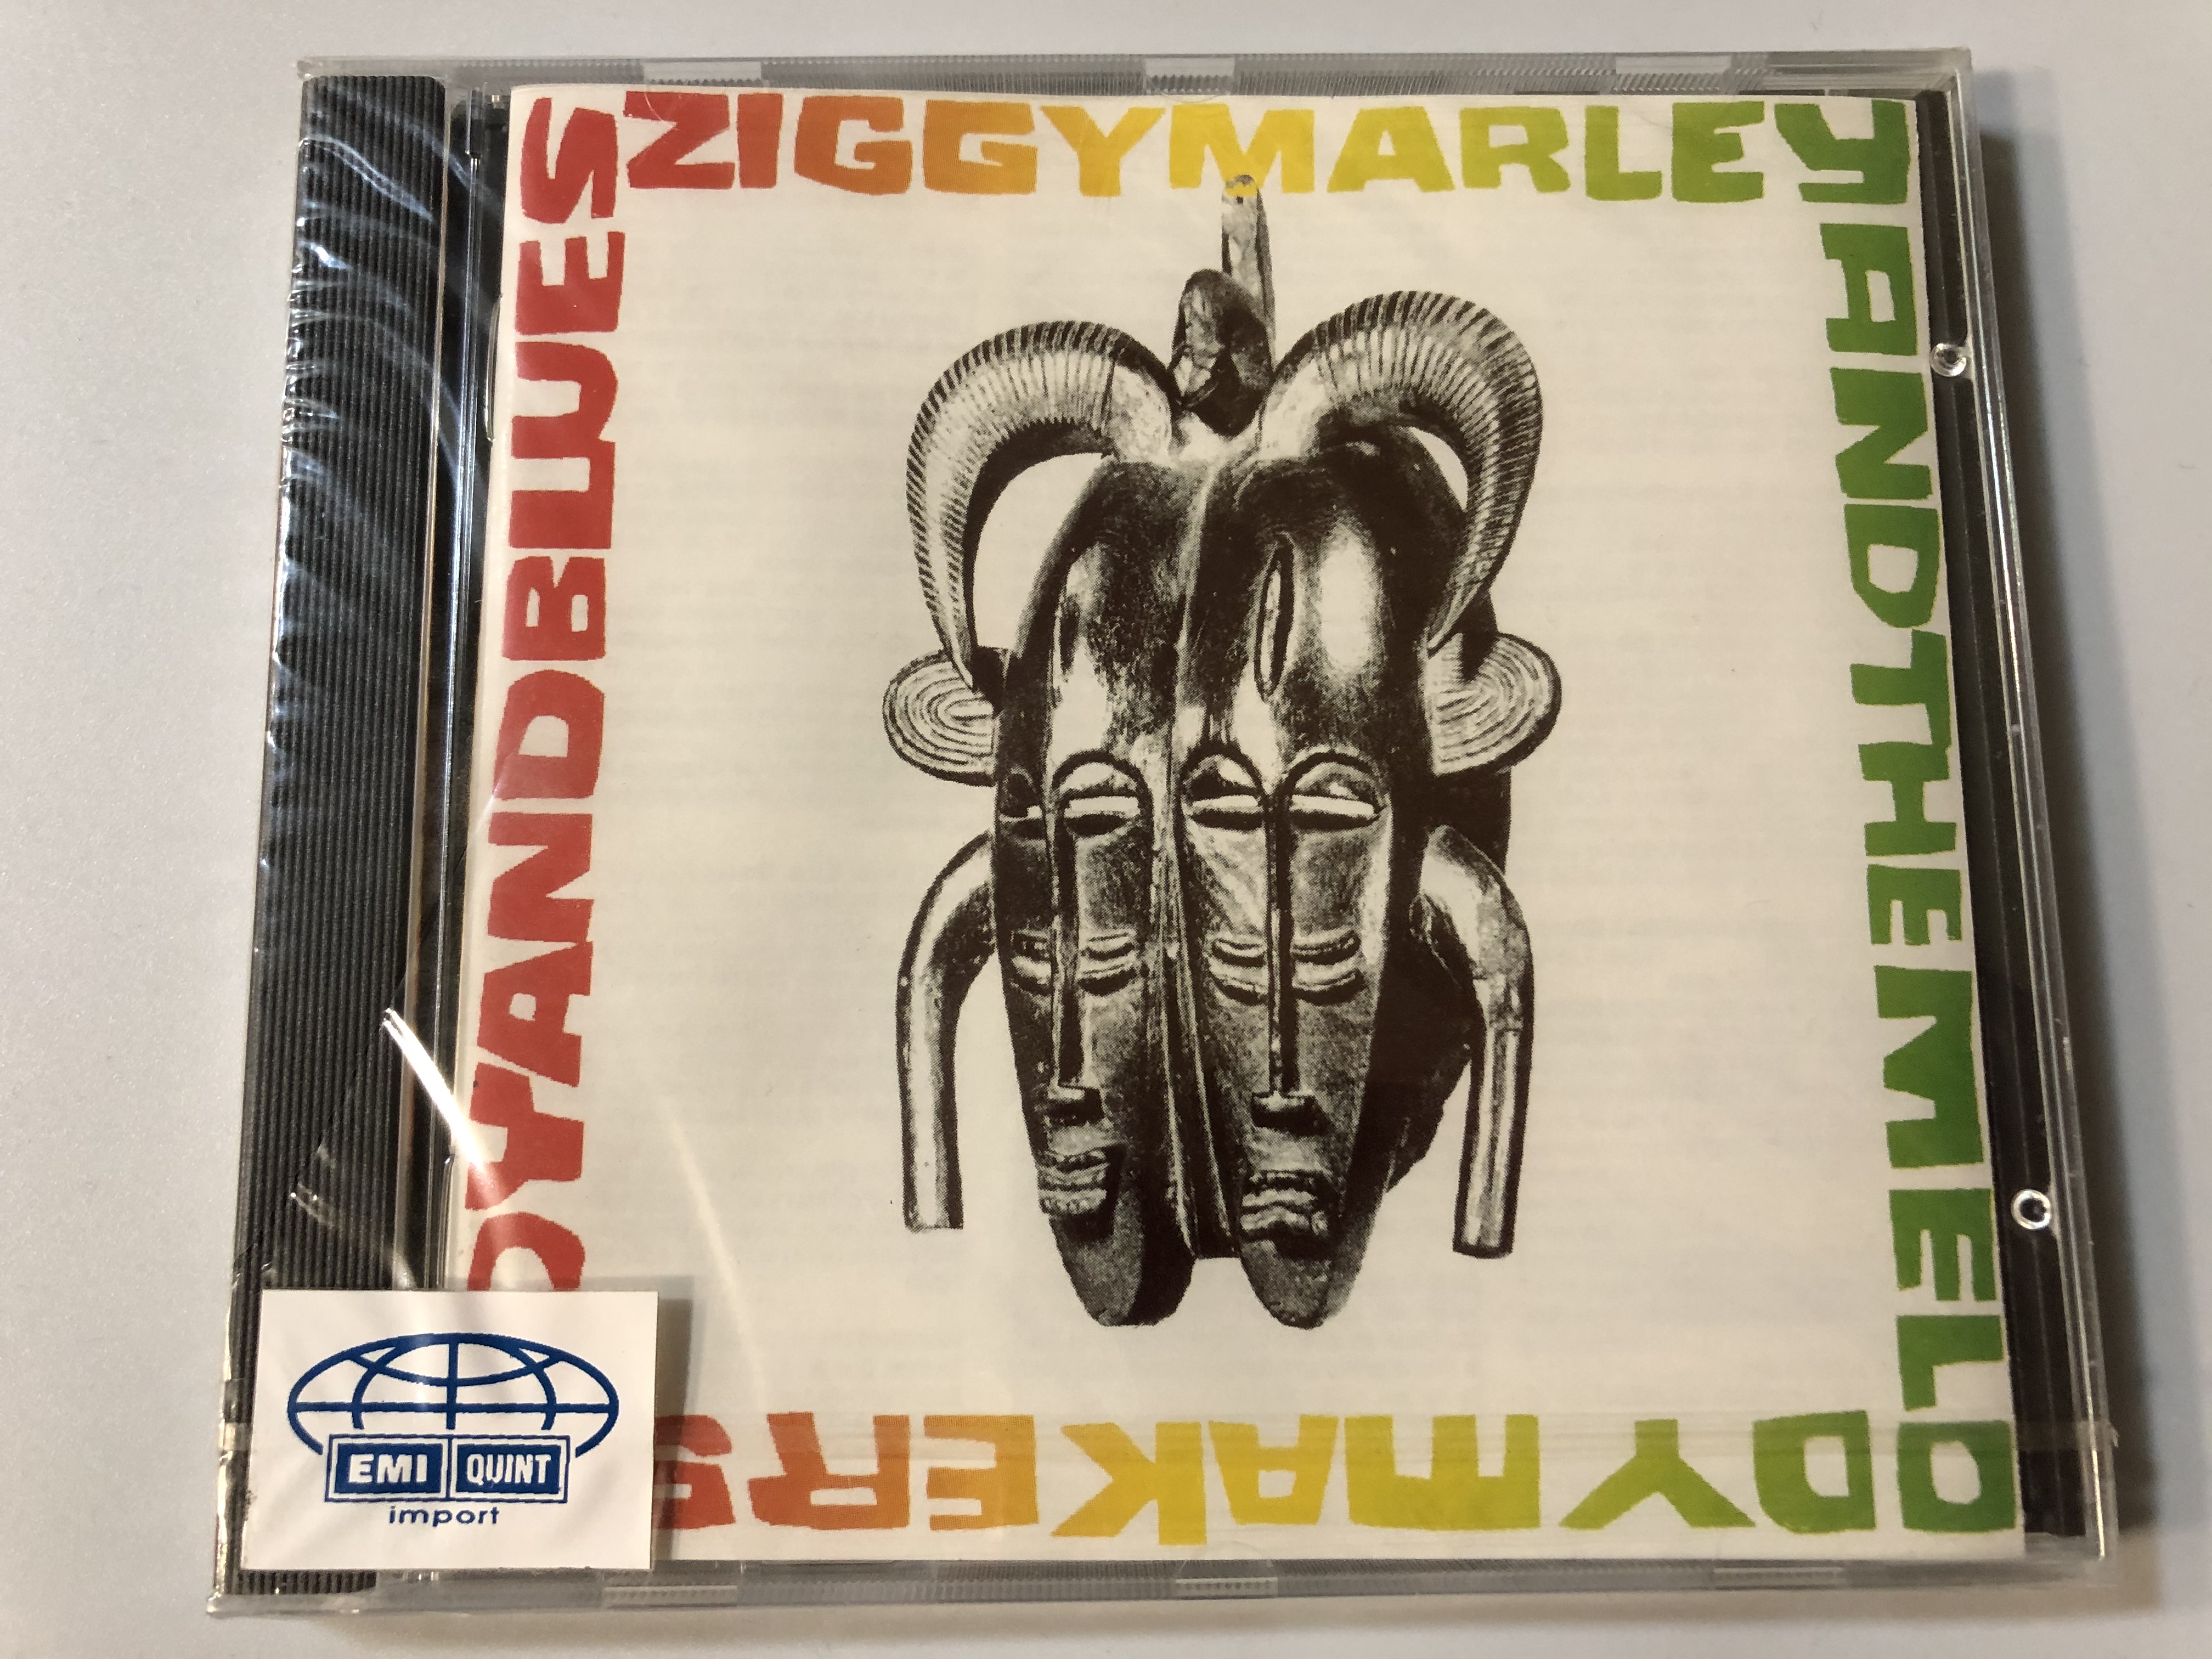 ziggy-marley-and-the-melody-makers-joy-and-blues-virgin-audio-cd-1993-cdvus-65-1-.jpg